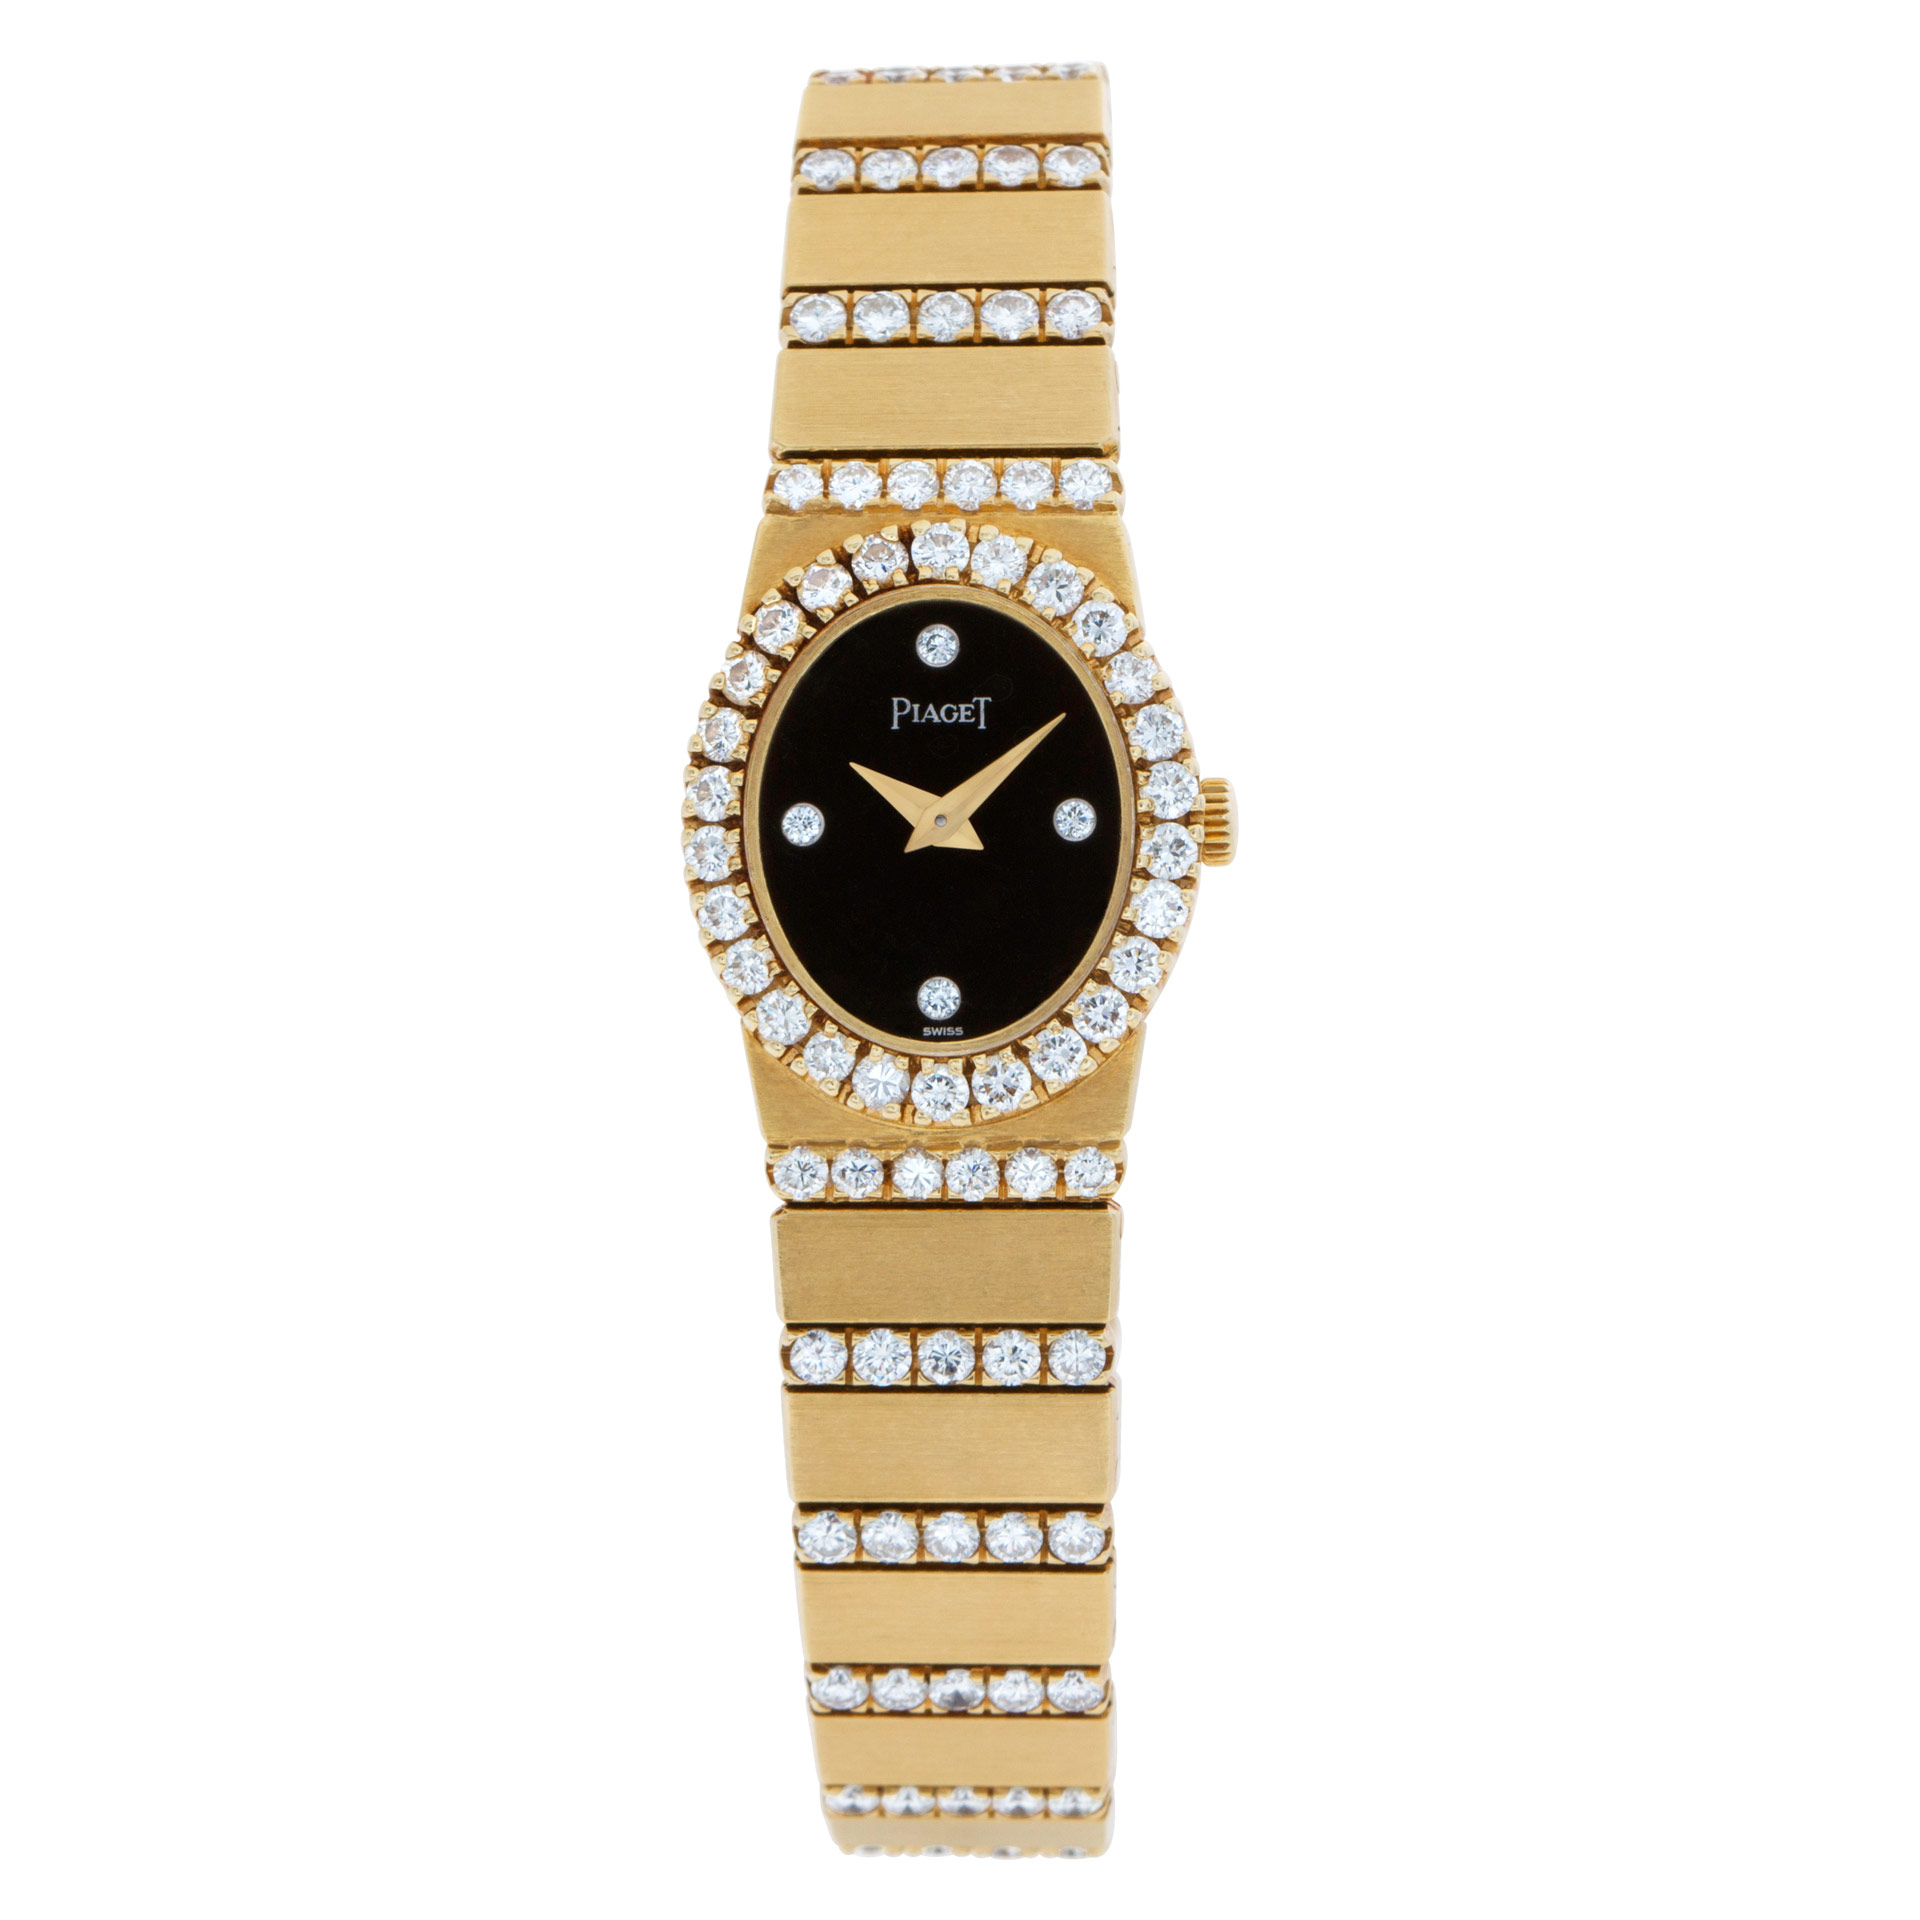 Piaget Polo 19mm 8326 c 606